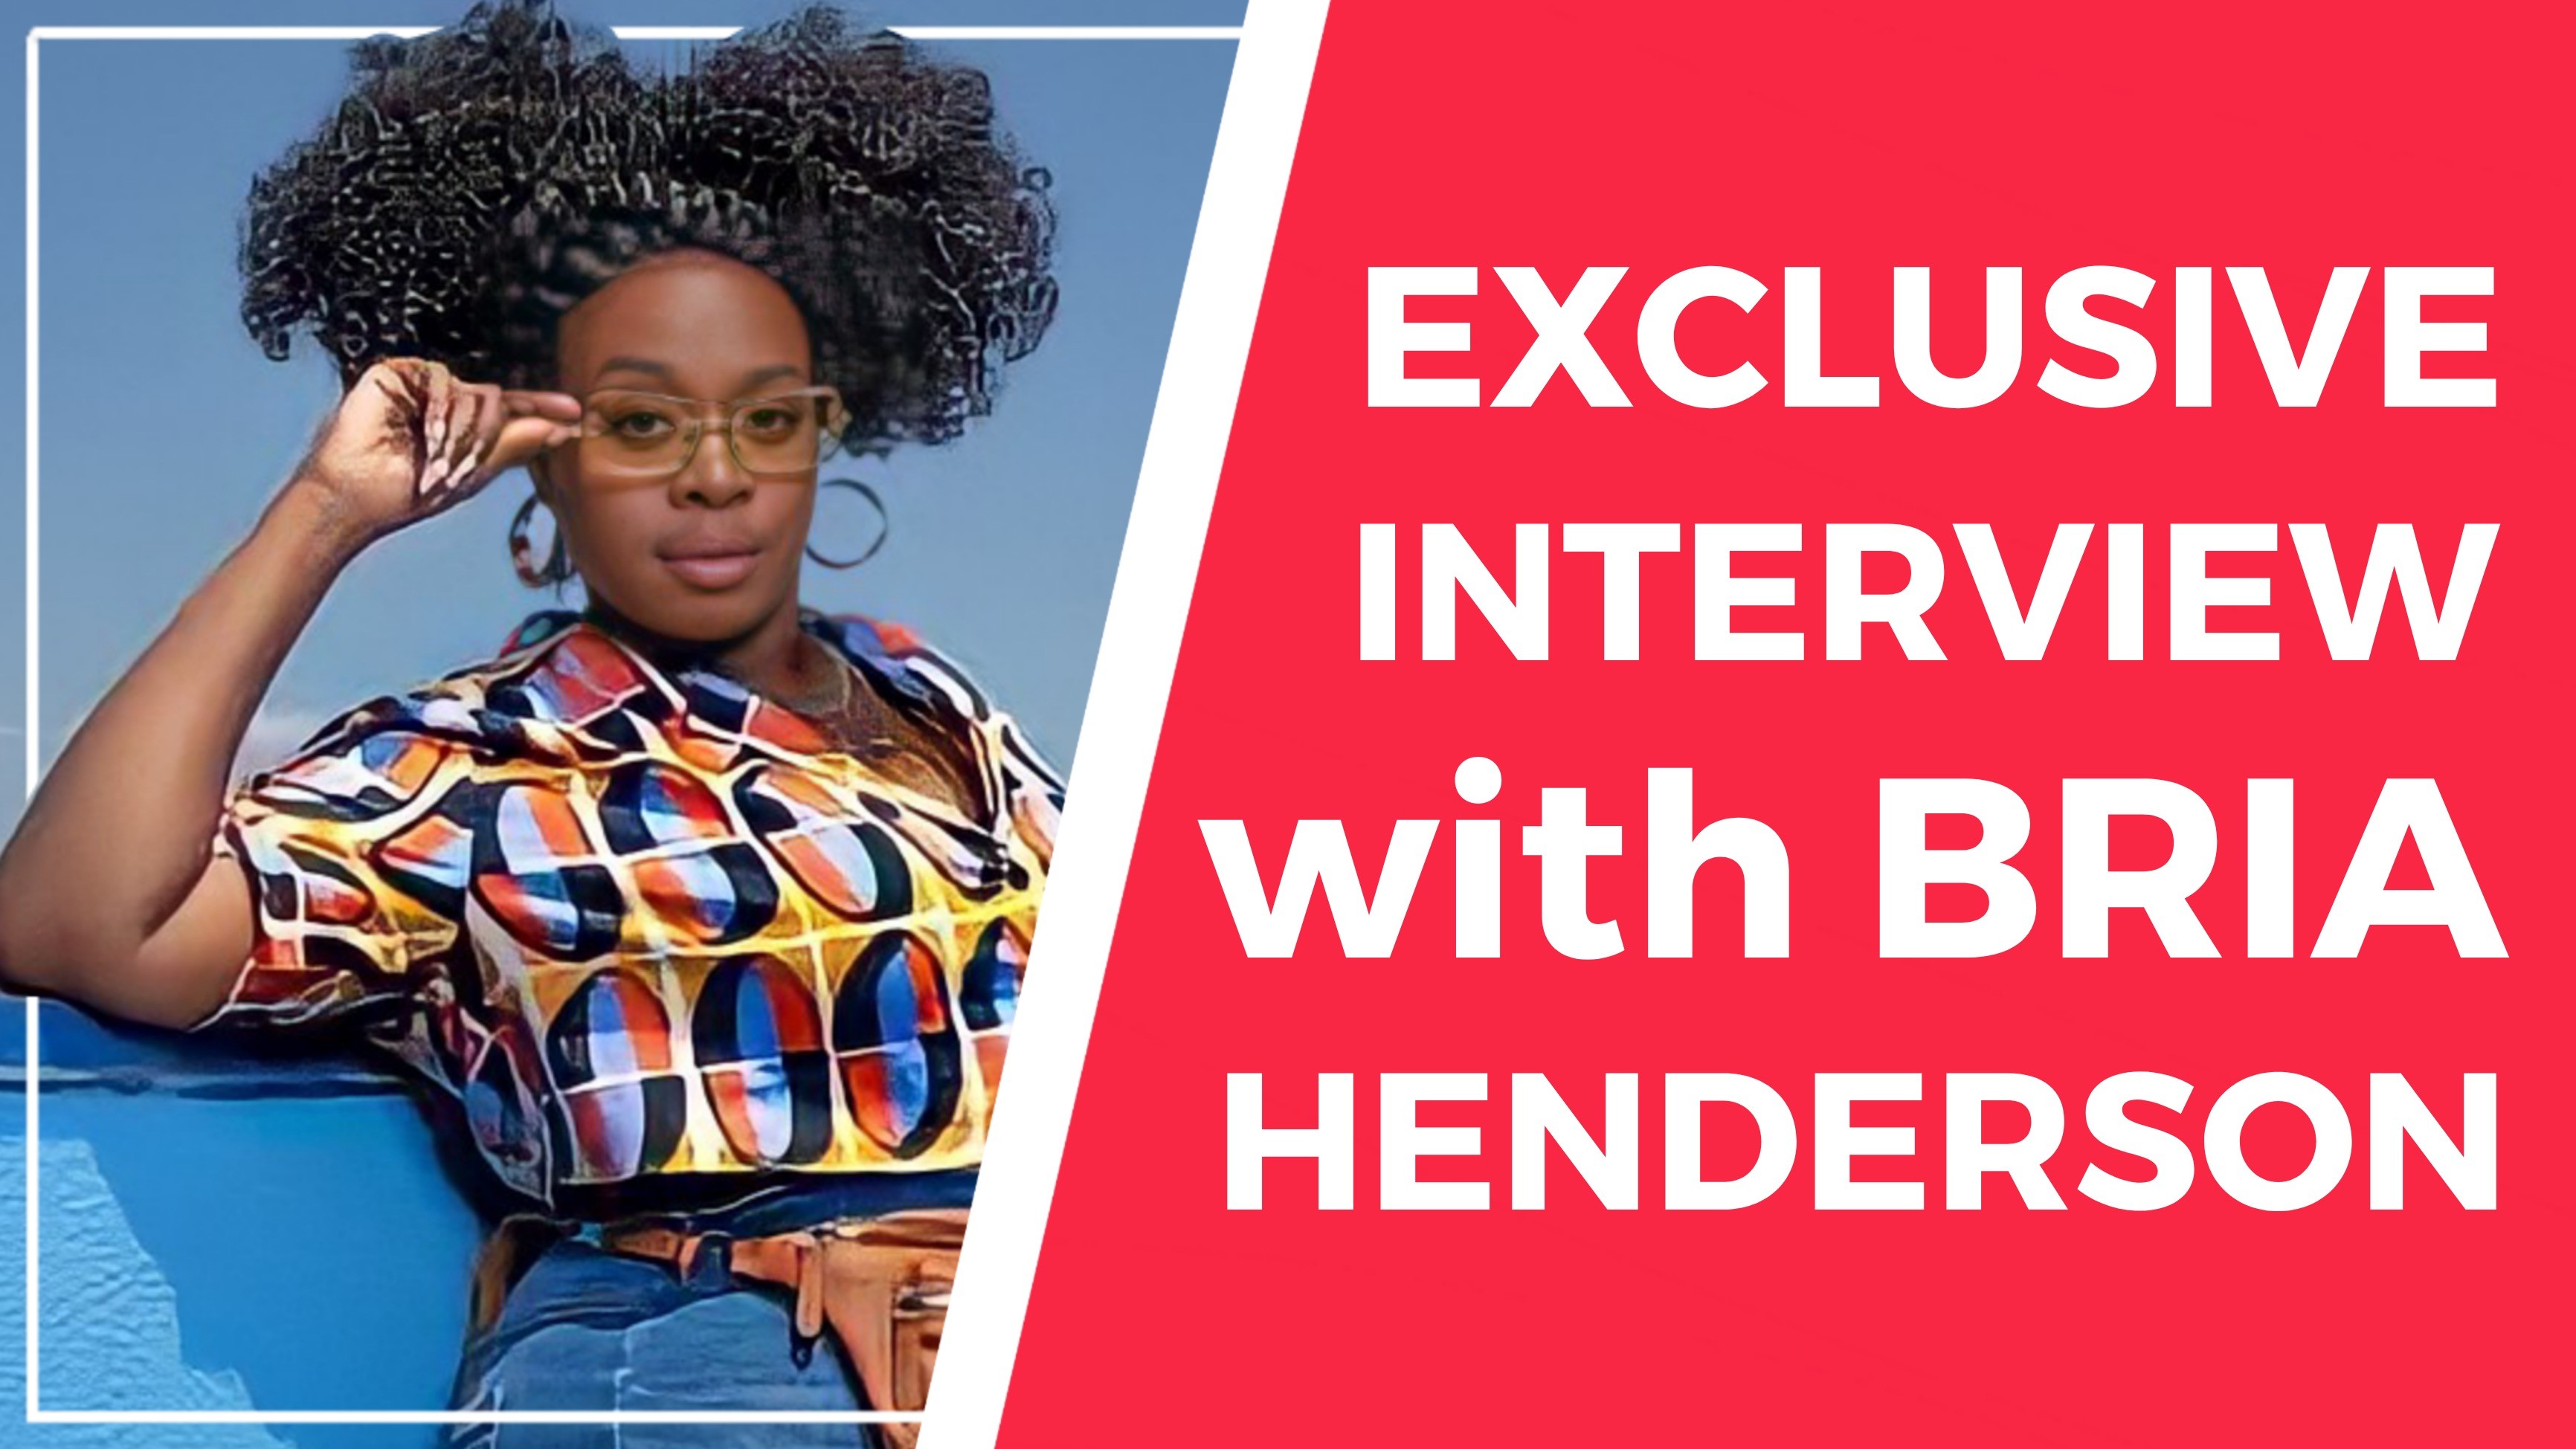 EXCLUSIVE: ‘The Good Doctor’ Star Bria Henderson Discusses Her Dream Project, Representation, And A Potential ‘Grey’s Anatomy’ Crossover (INTERVIEW)